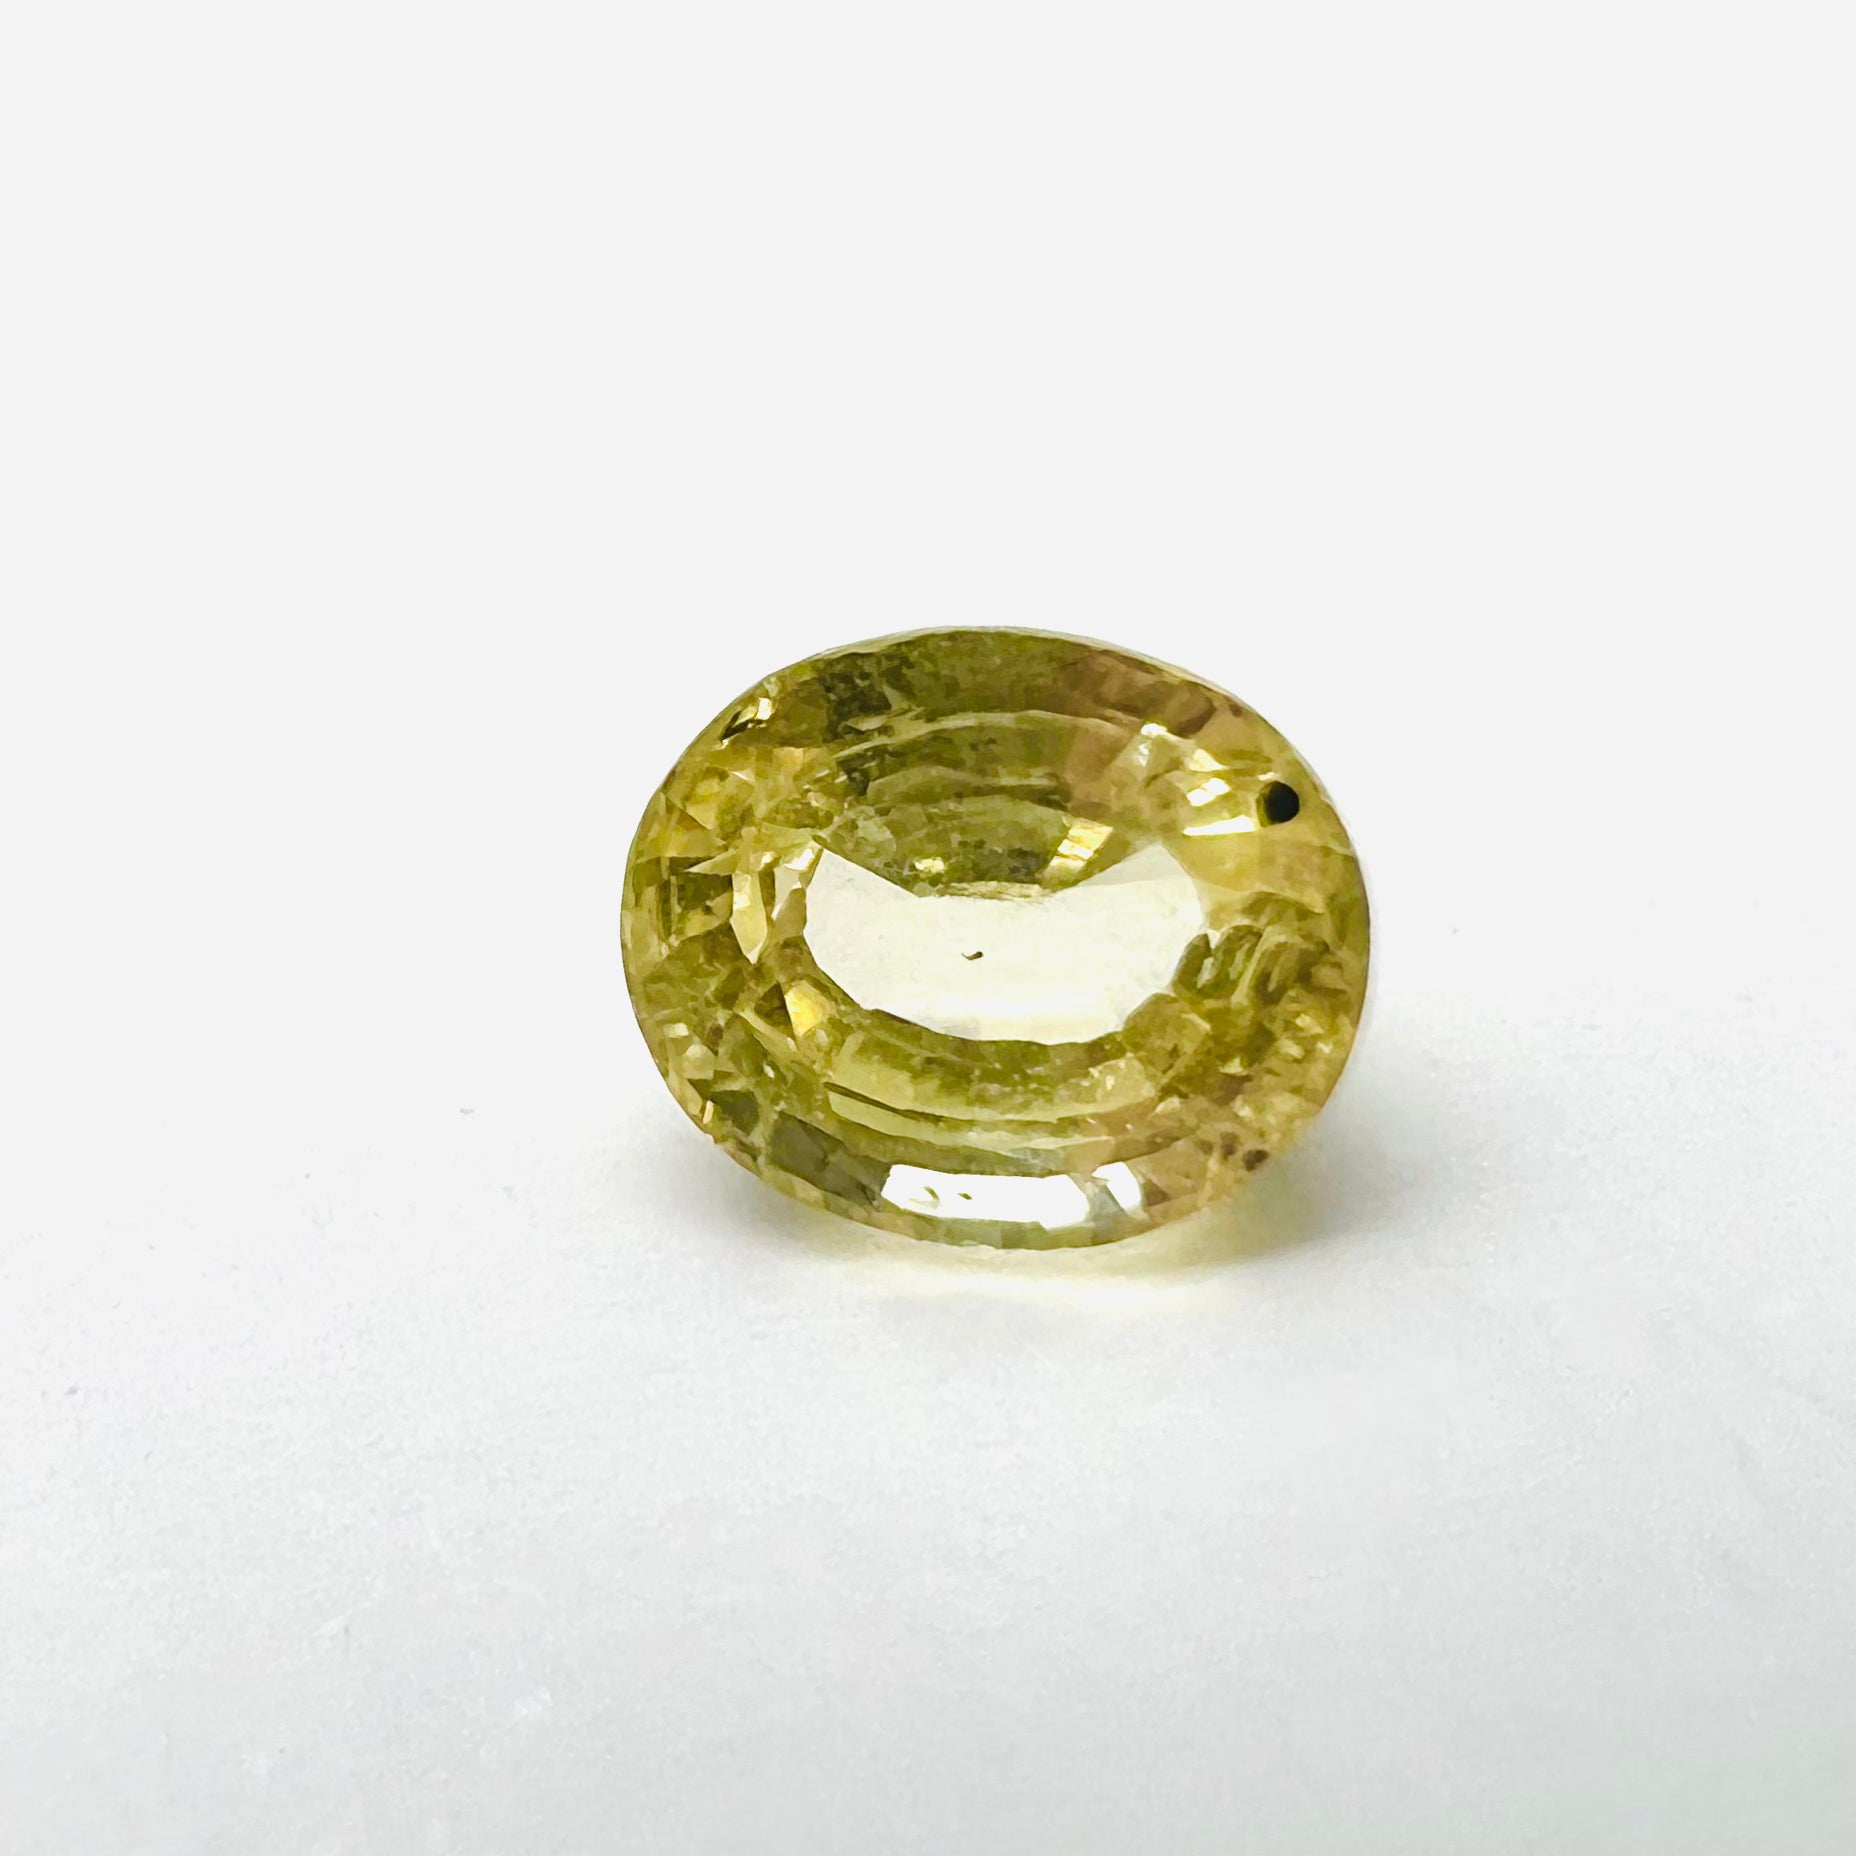 .94CTW Loose Oval Yellow Sapphire 5.6x4.9x3.8mm Earth mined Gemstone